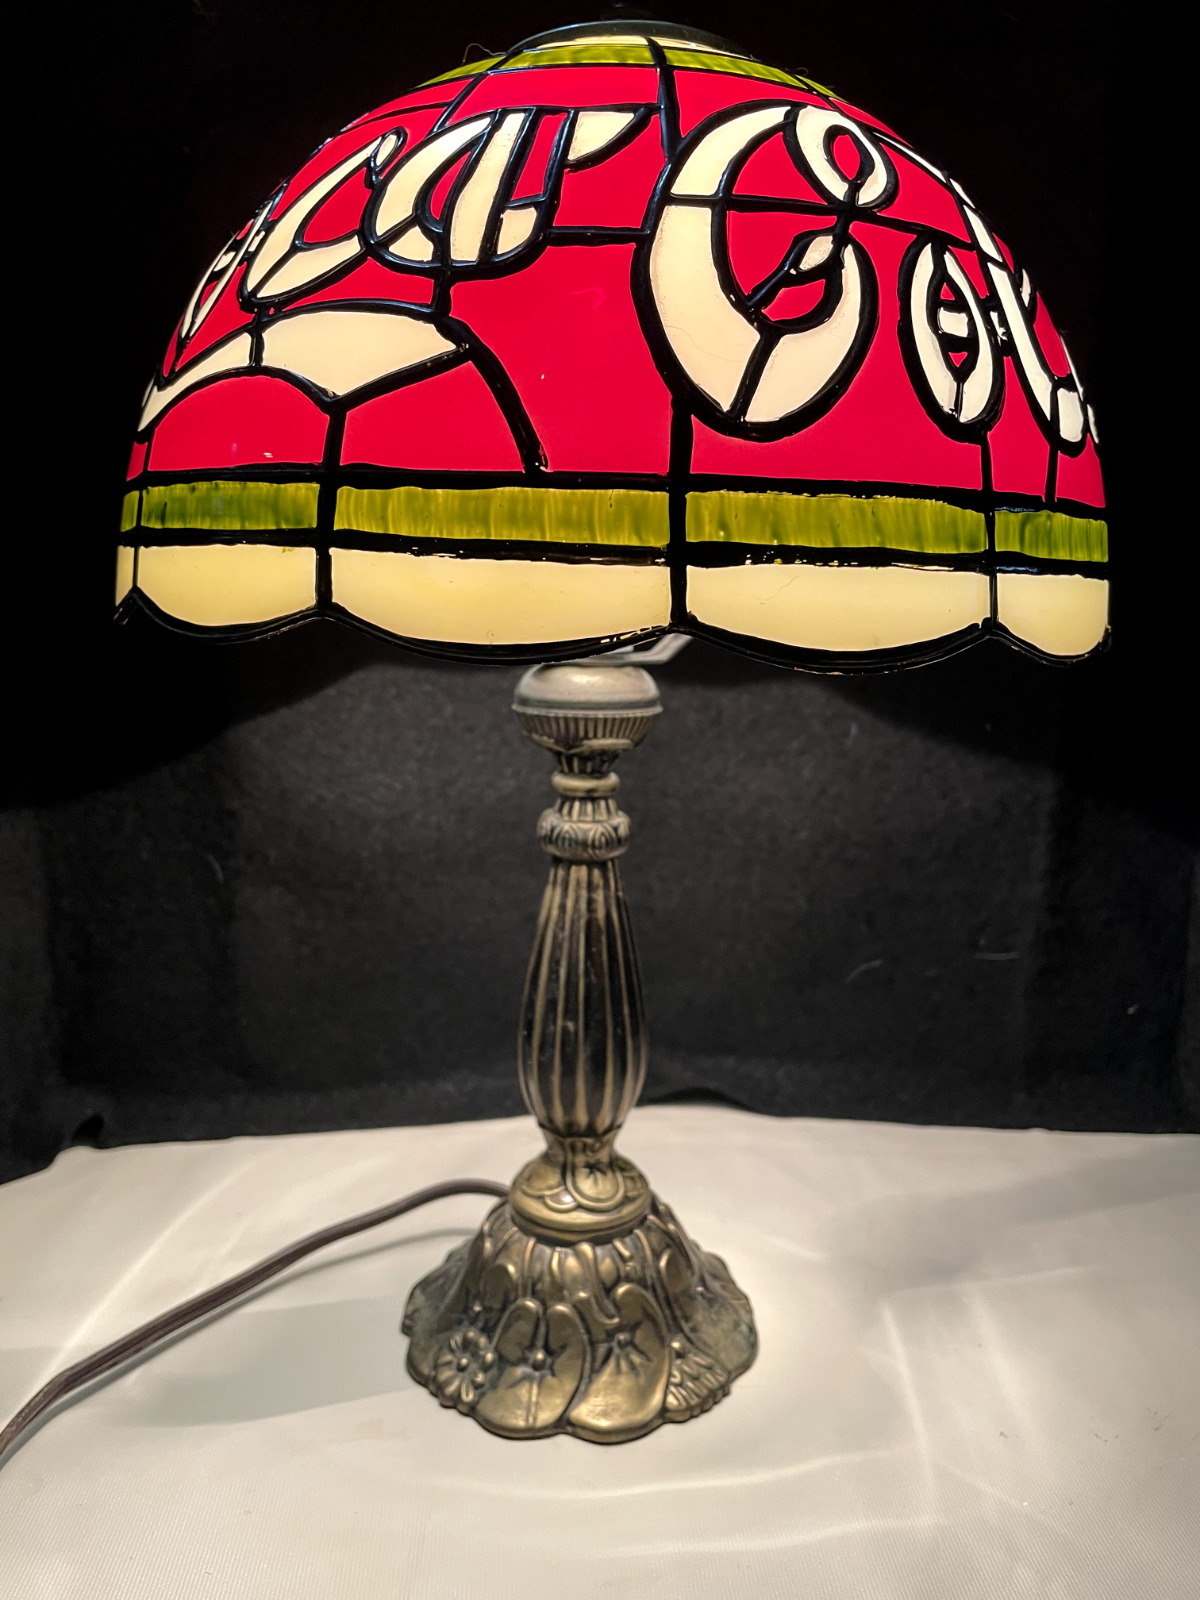 Coca-Cola Vintage/Tiffany Style Lamp WORKS GREAT CONDITION